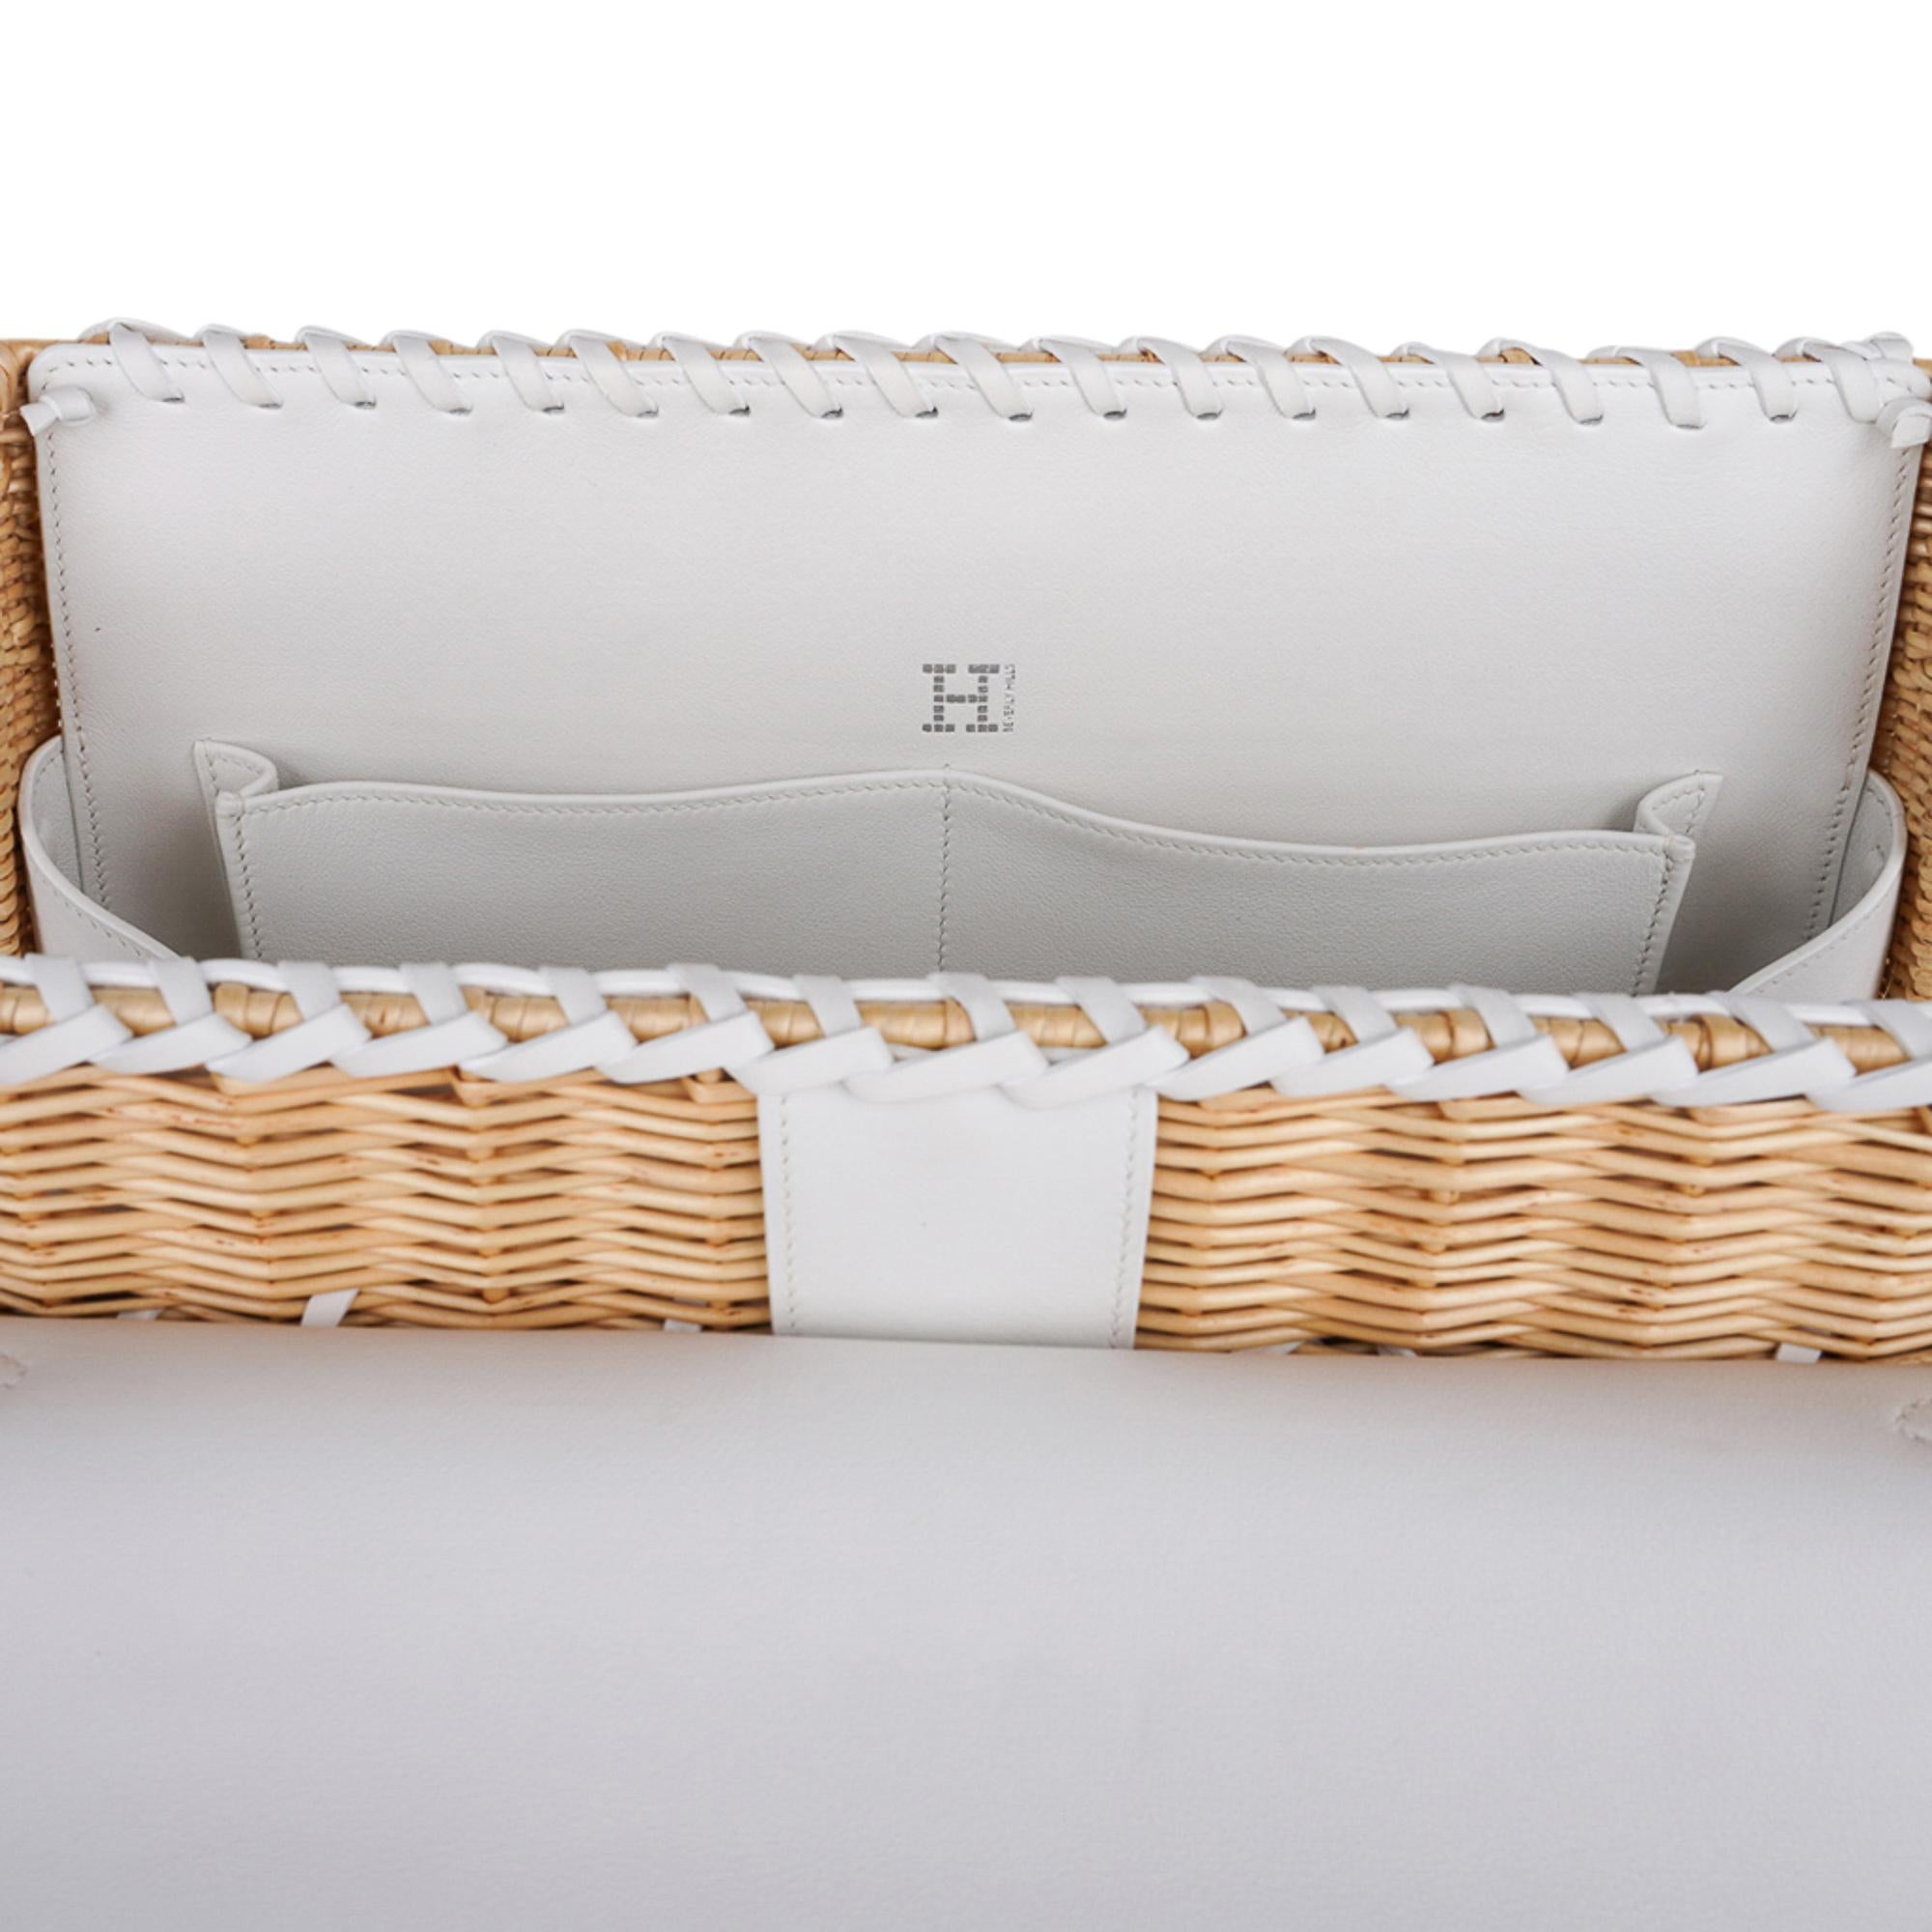 Hermes Kelly Picnic 35 Bag White Swift Leather / Osier (Wicker) Limited Edition 7